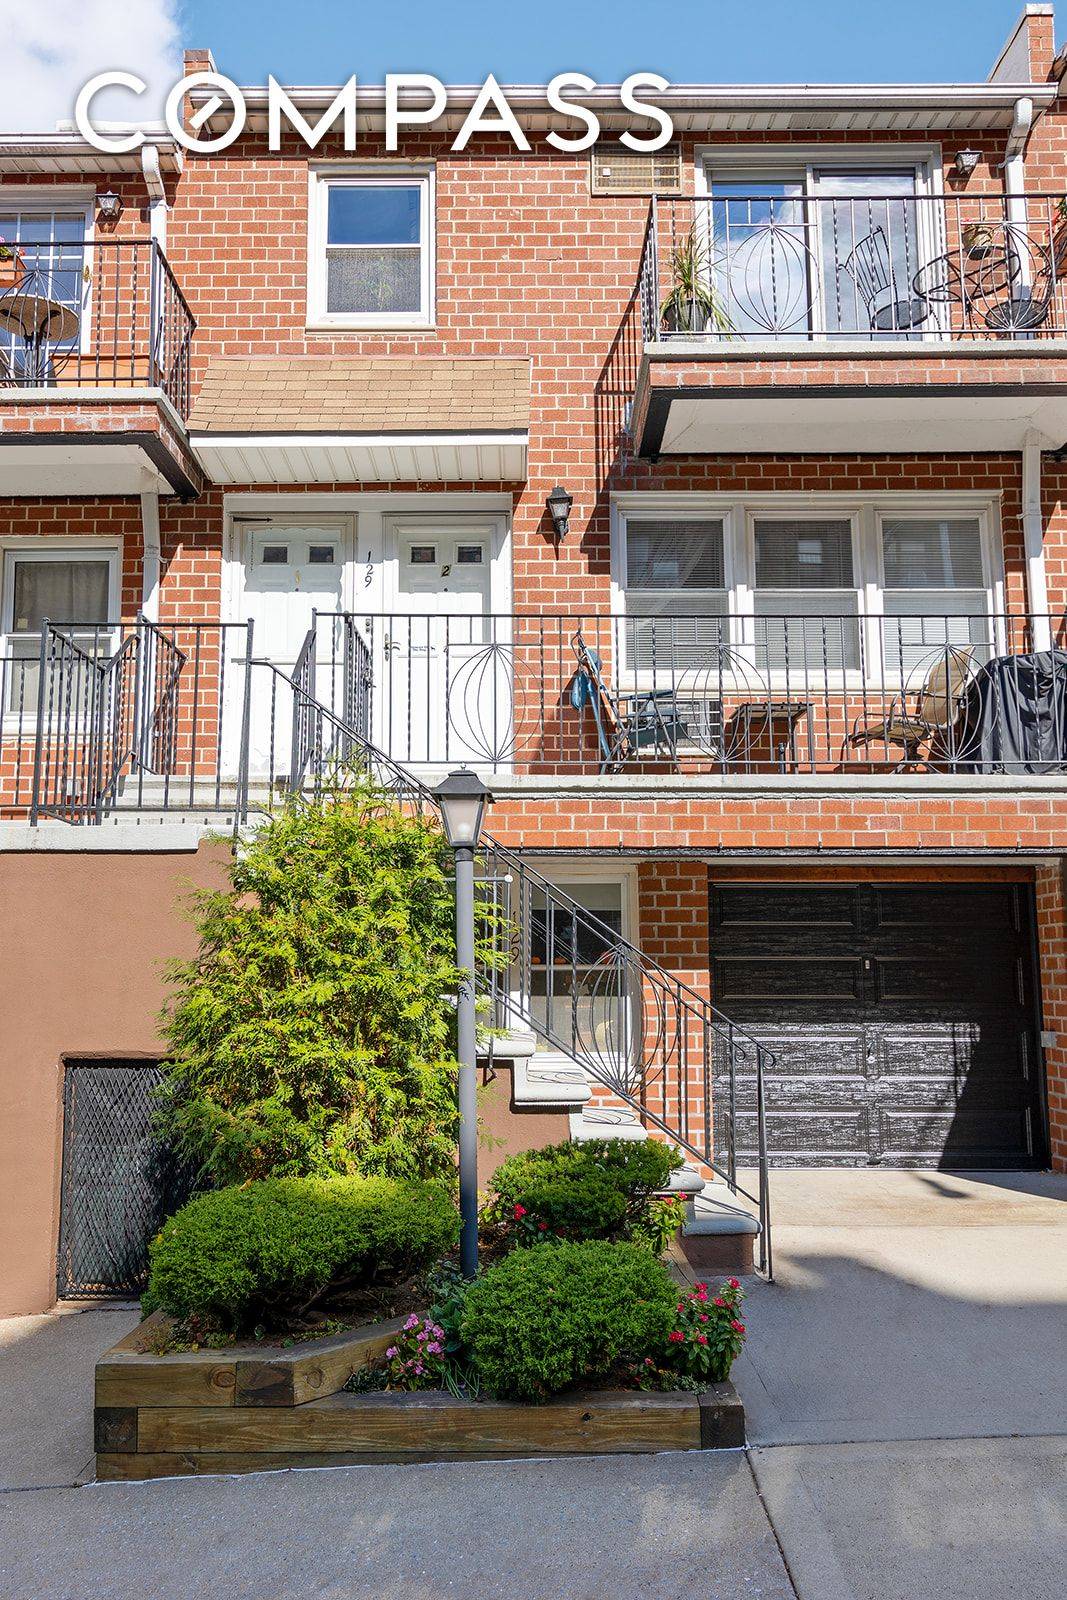 Rise to the top floor of this iconic Bay Ridge Brooklyn development.